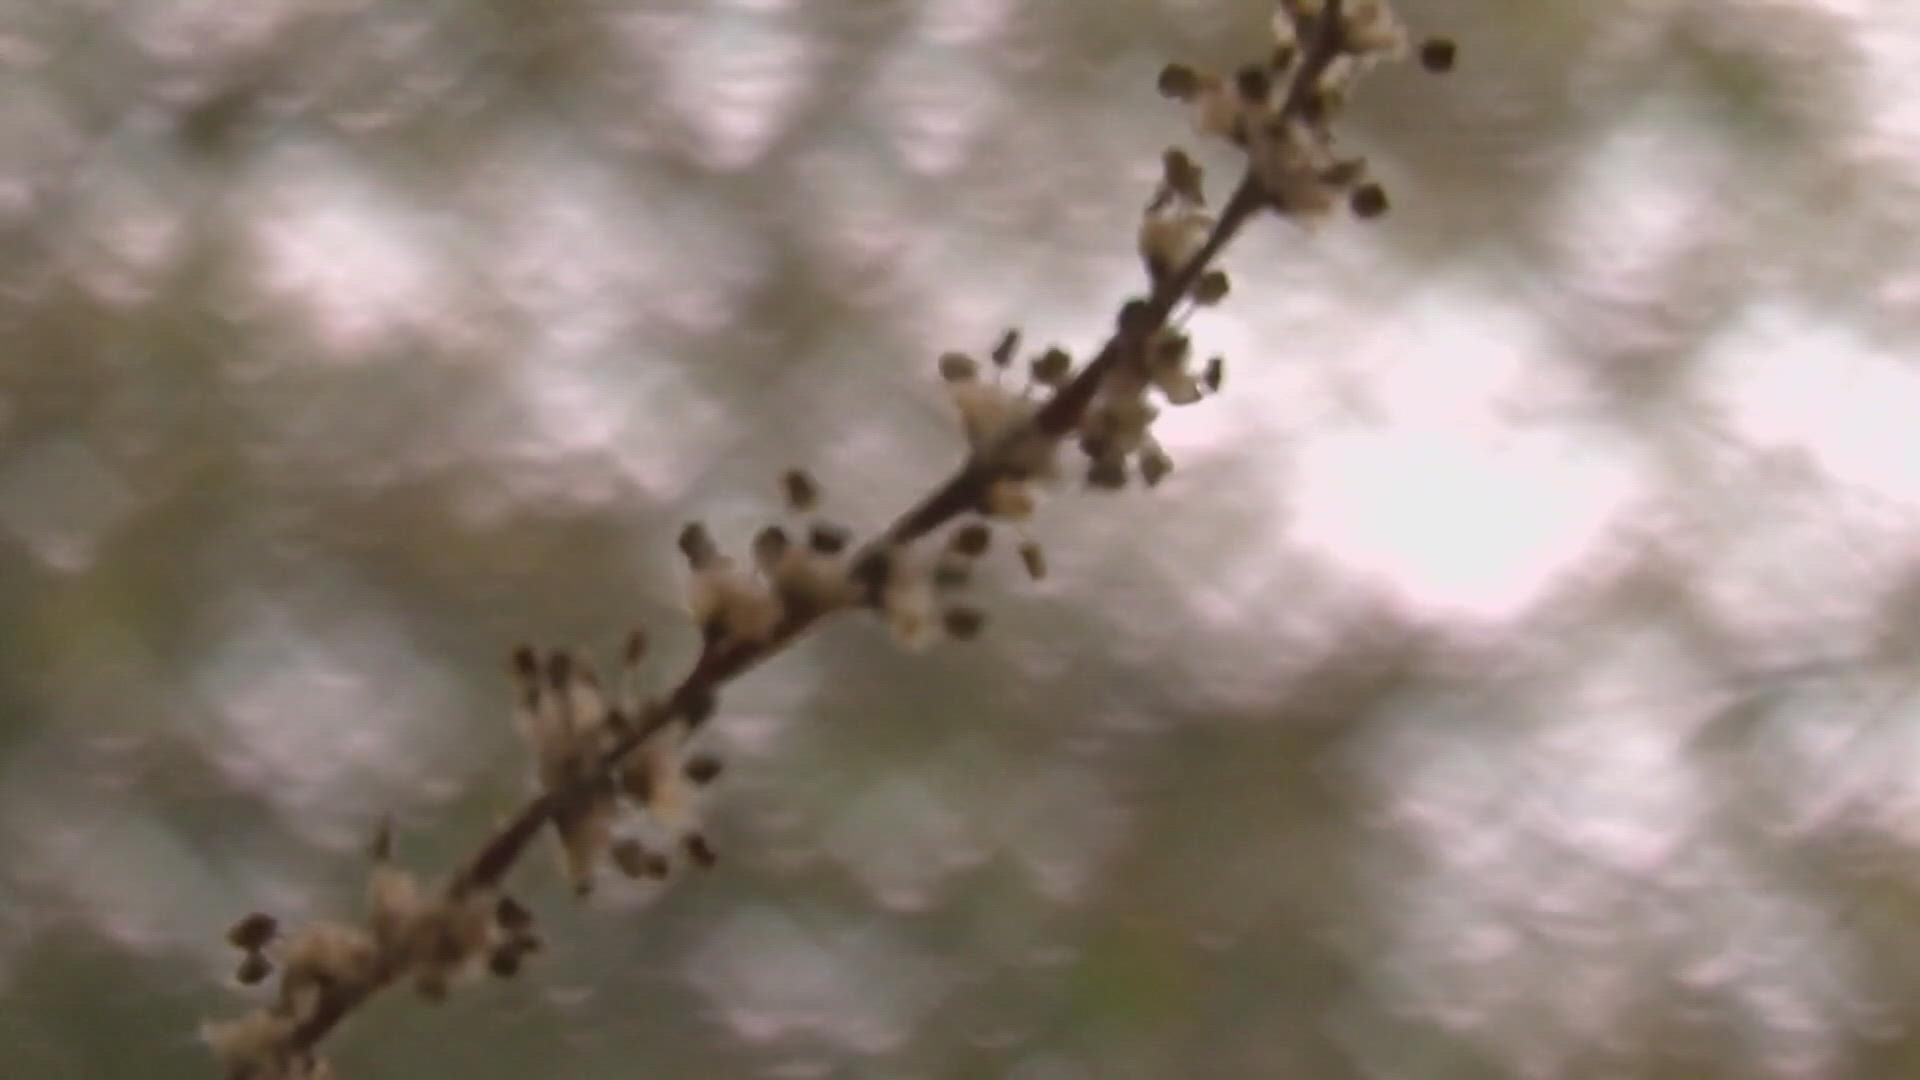 With spring just around the corner a doctor is offering tips to those who suffer with allergies.